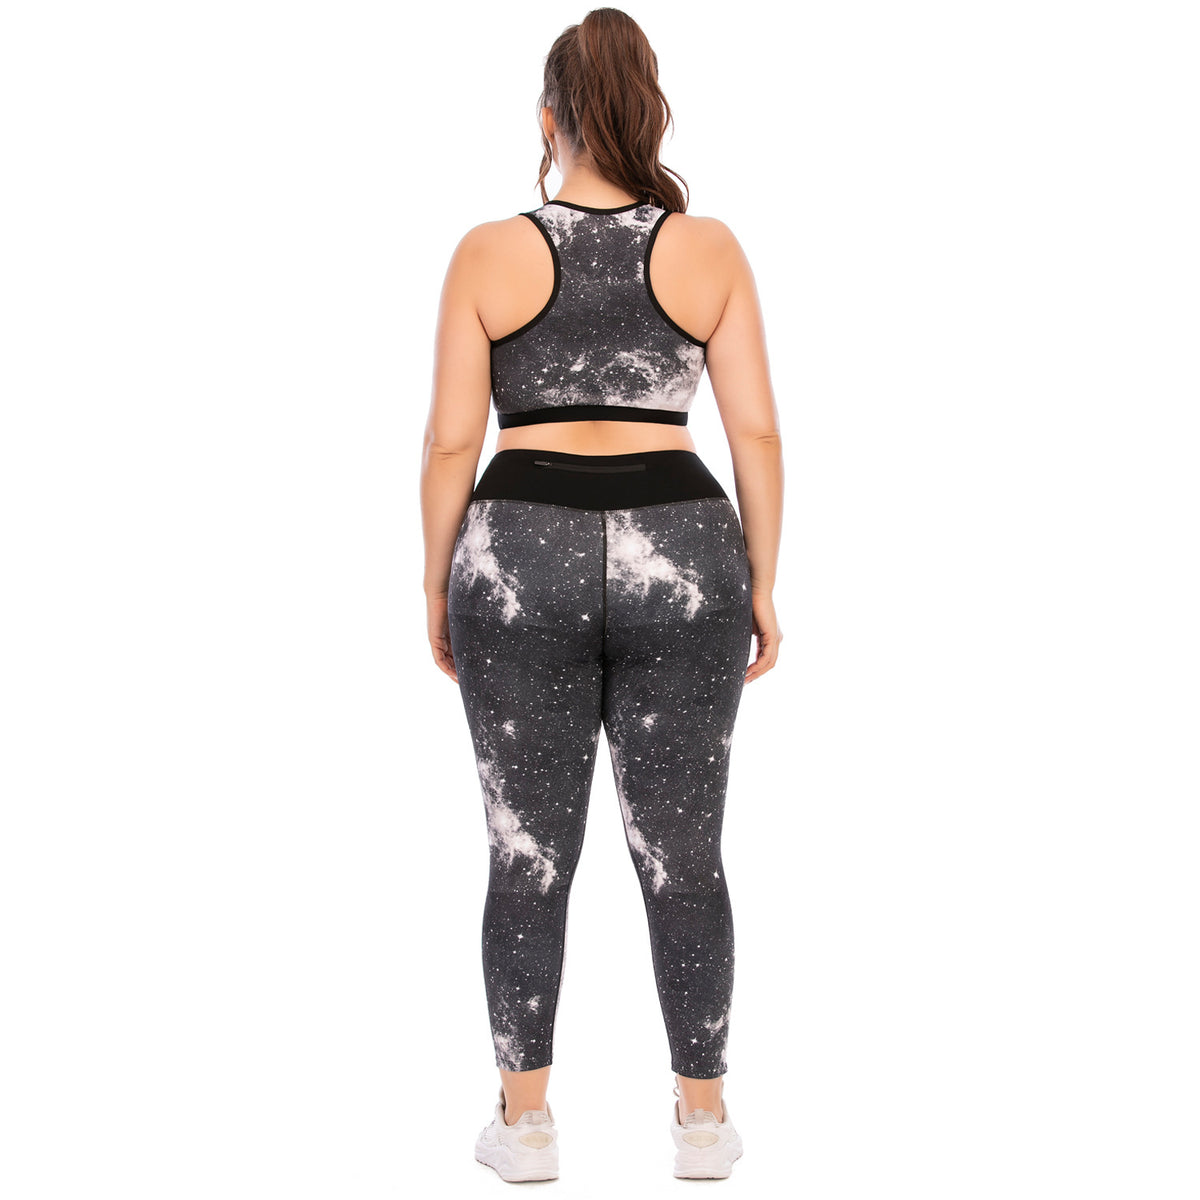 Workout Clothes Suit Plus Size Yoga Clothes Tight-fitting  Pants Sports Bra Angelwarriorfitness.com